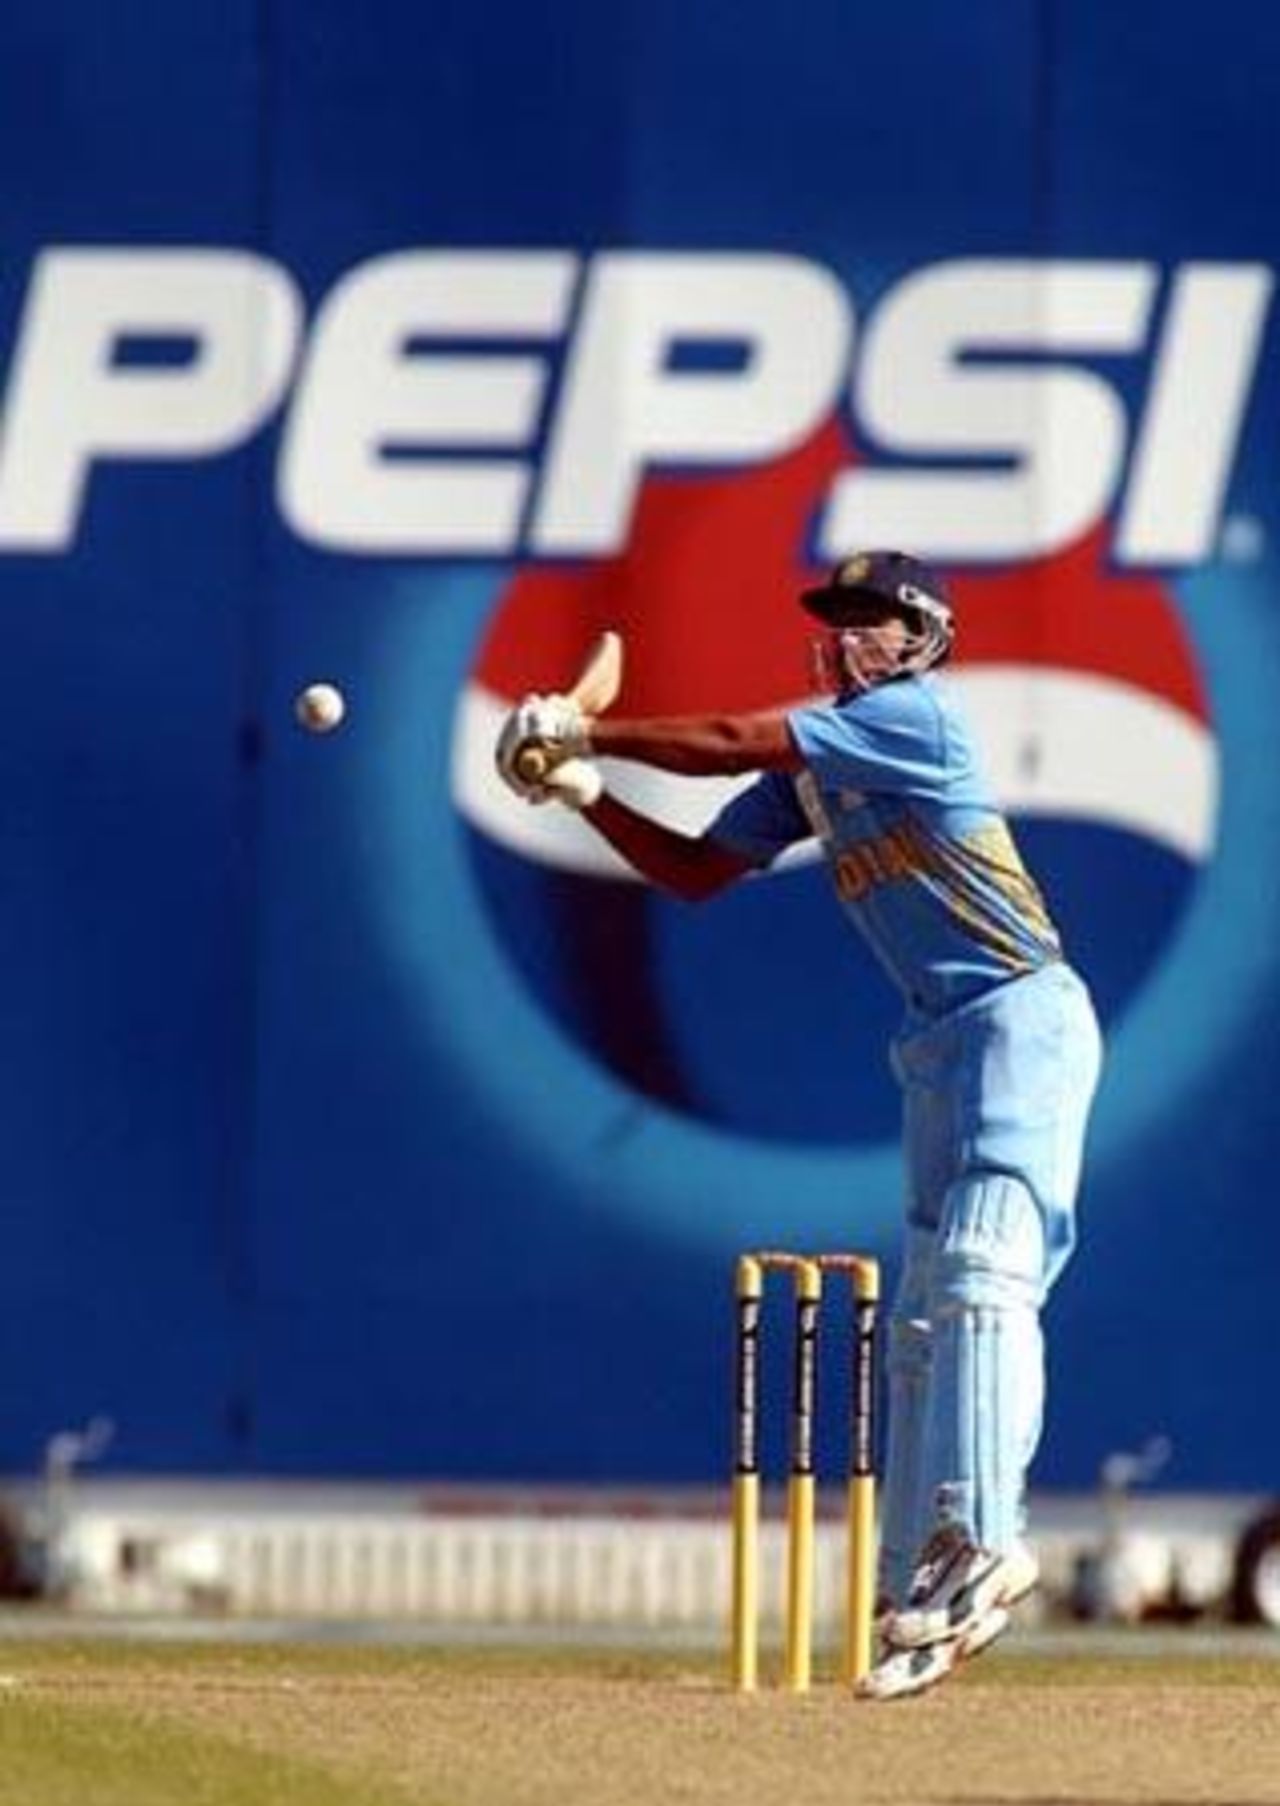 India Under-19 batsman Chandan Madaan reaches to cut a wide delivery outside off stump during his innings of 10. 1st ICC Under-19 World Cup Super League Semi Final: India Under-19s v South Africa Under-19s at Bert Sutcliffe Oval, Lincoln, 3 February 2002.